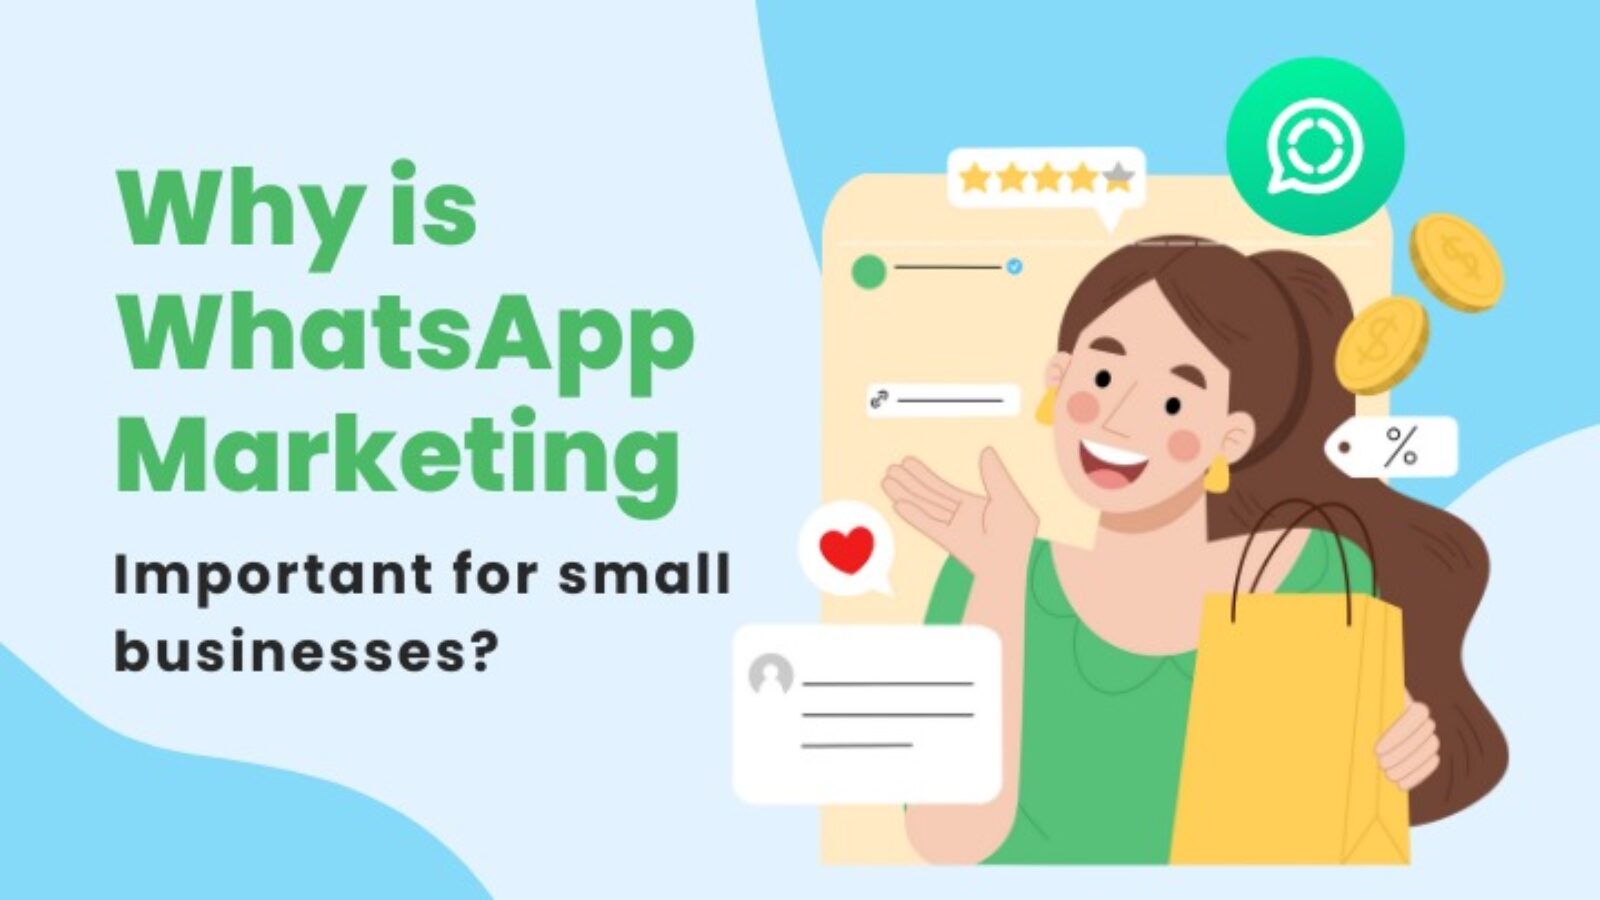 Why WhatsApp marketing is important for small business